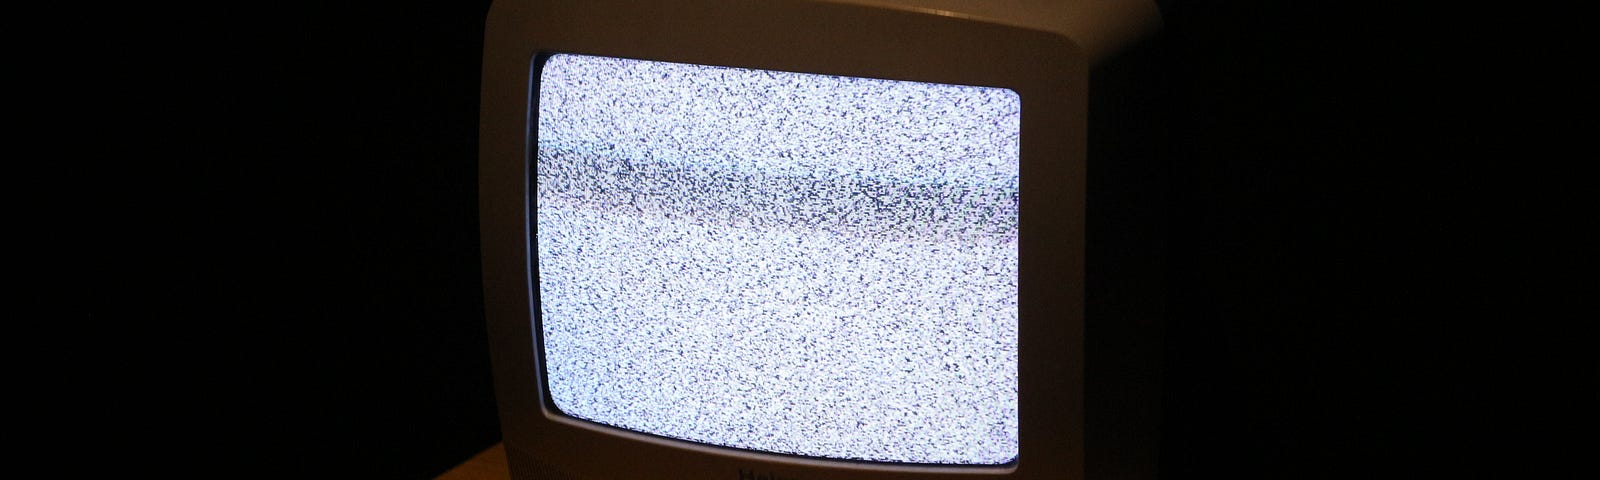 TV showing a screen of white noise